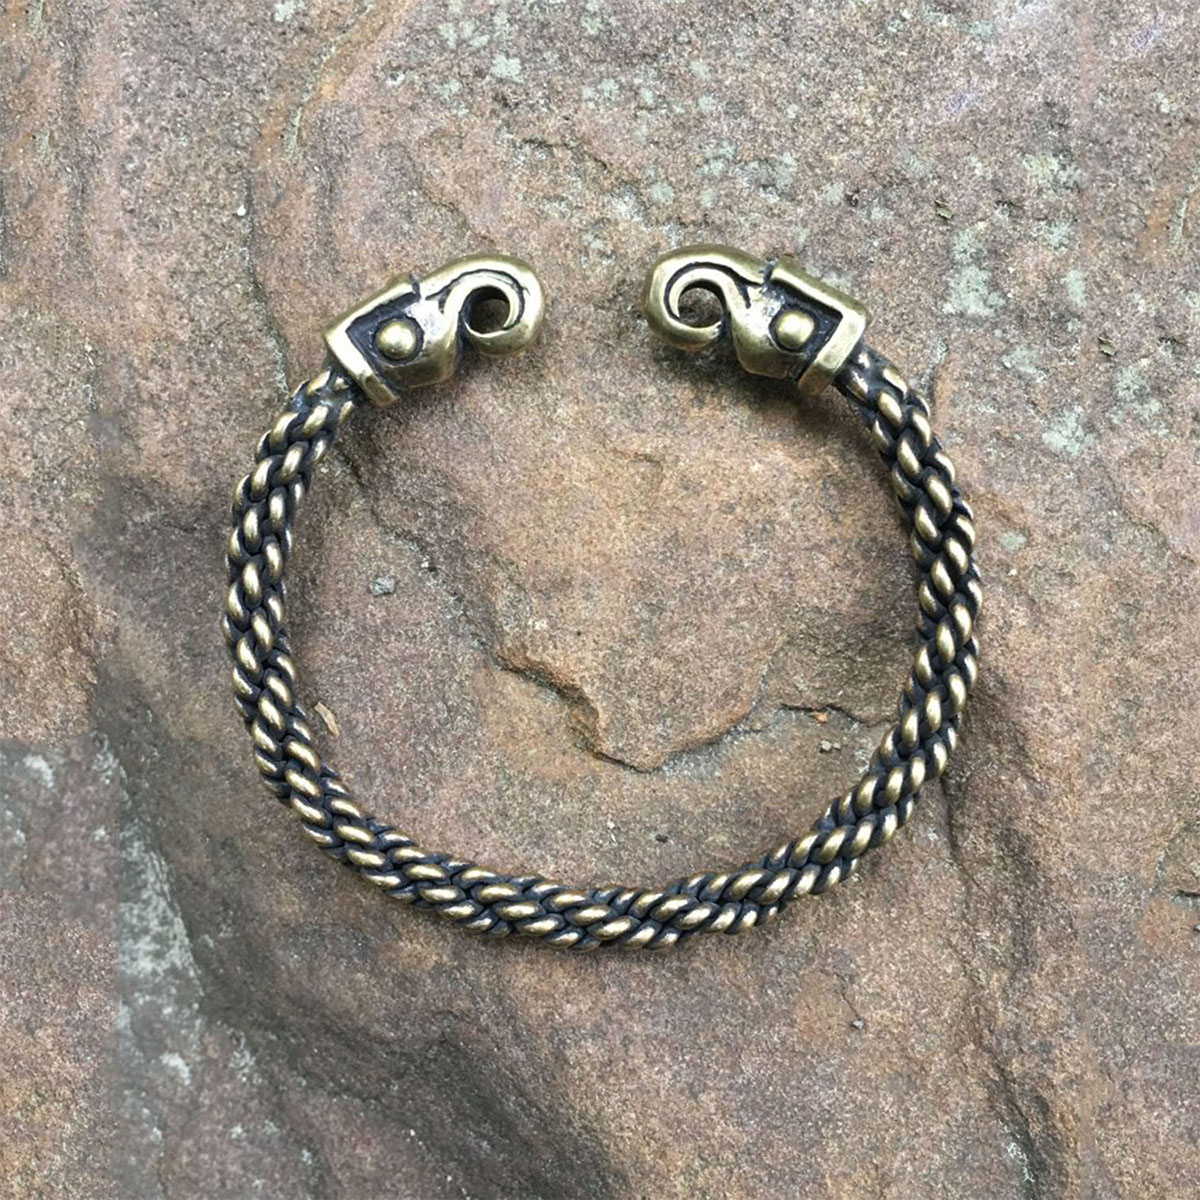 Forged Steel Woven Link Bracelet with Ball Terminals - Medieval/Iron/Celtic/ Torc | eBay